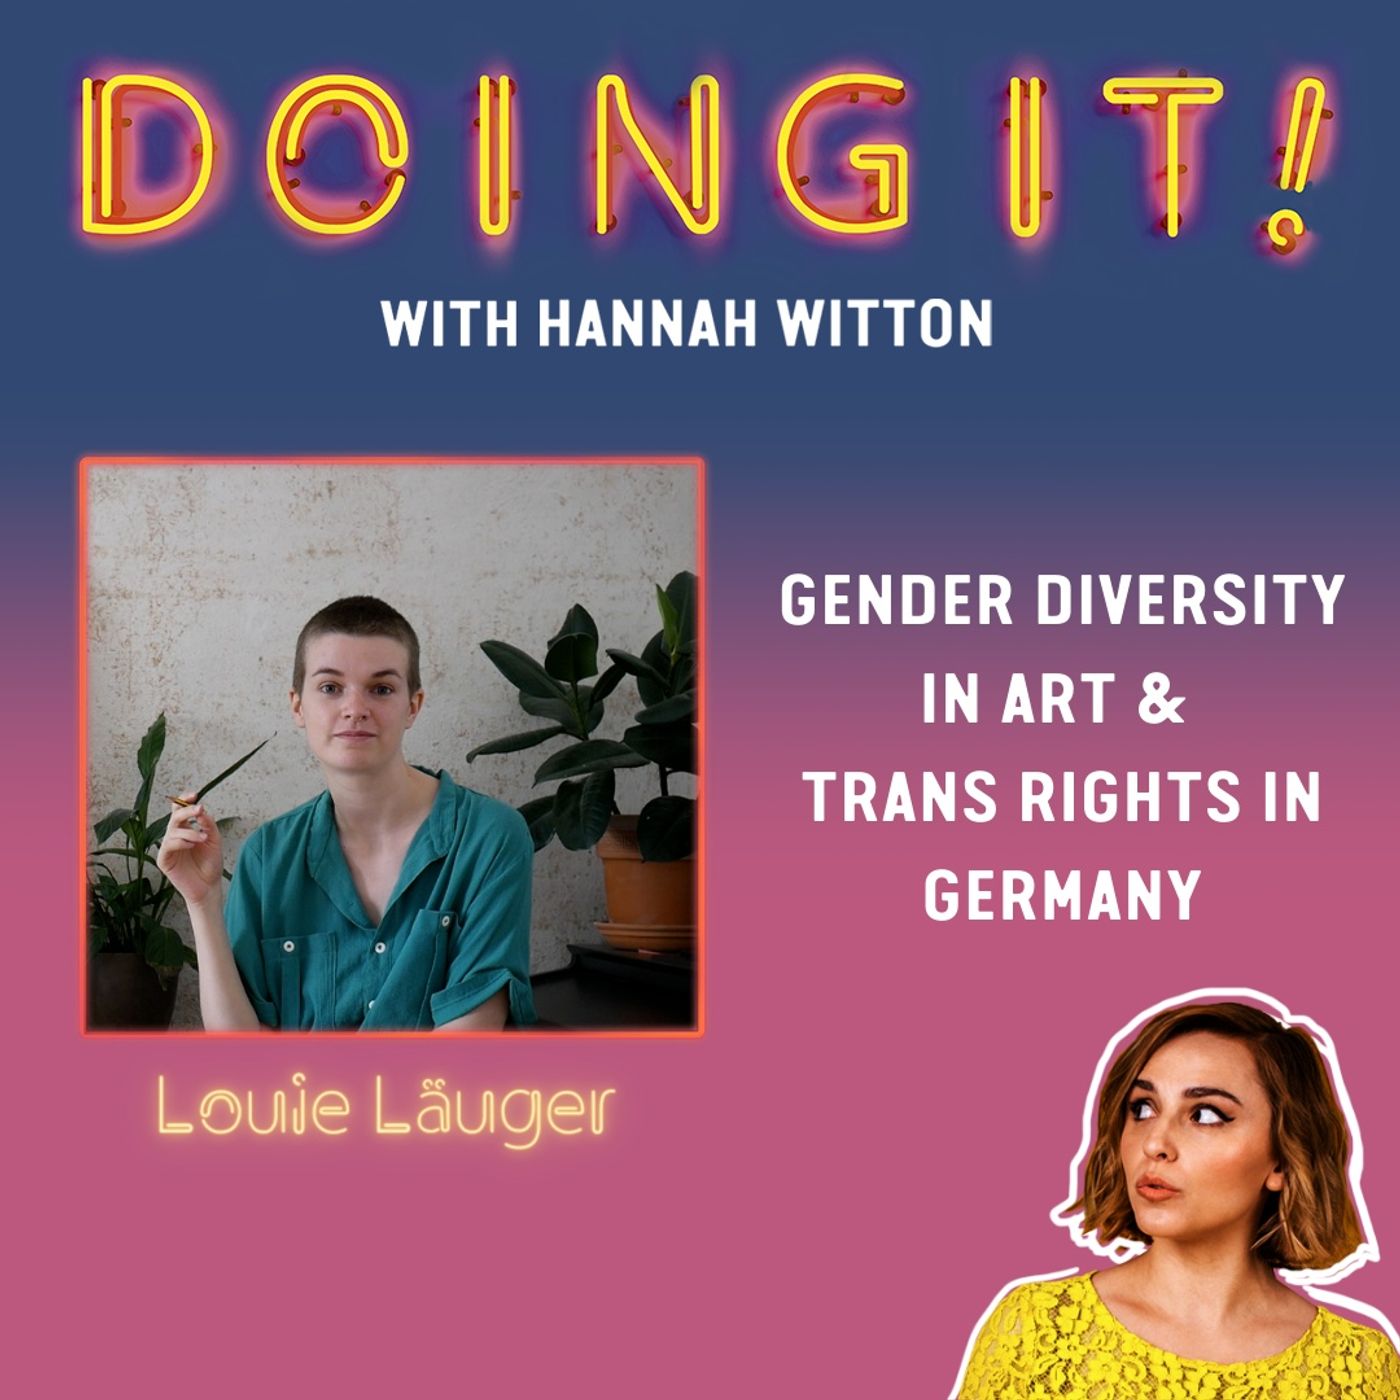 Gender Diversity in Art and Trans Rights in Germany with Louie Läuger